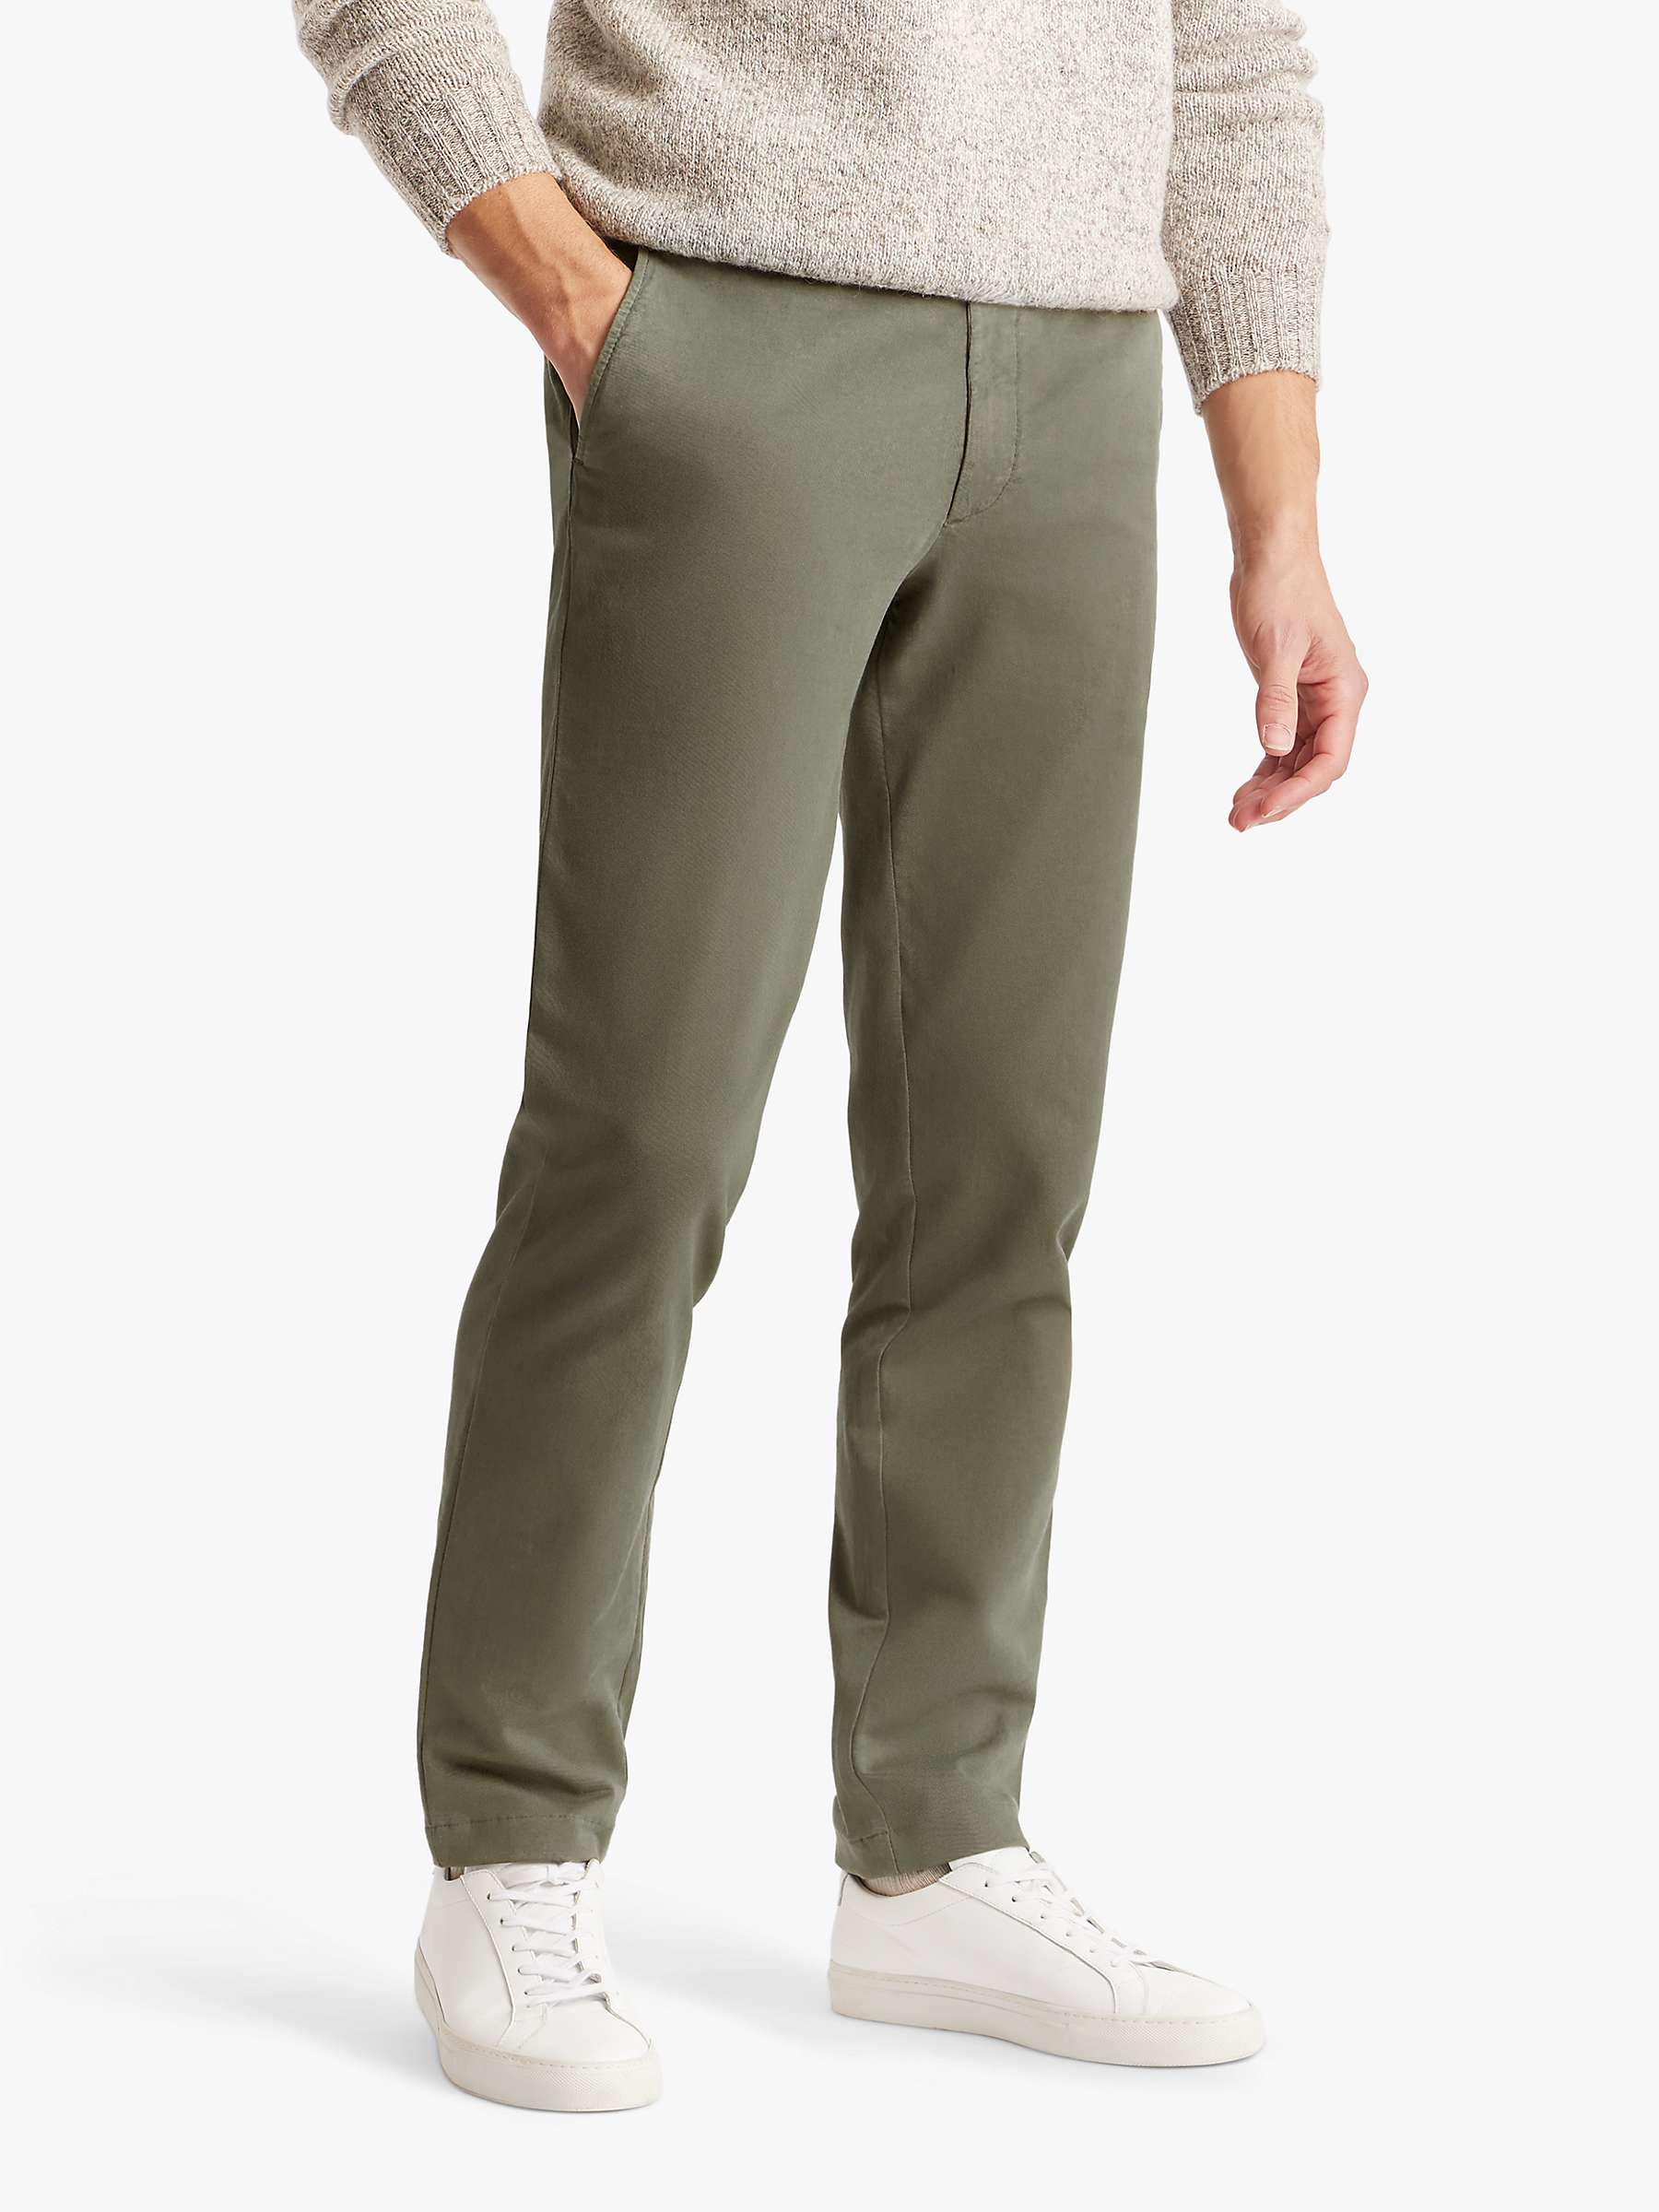 Buy SPOKE Heroes Cotton Blend Narrow Thigh Chinos Online at johnlewis.com